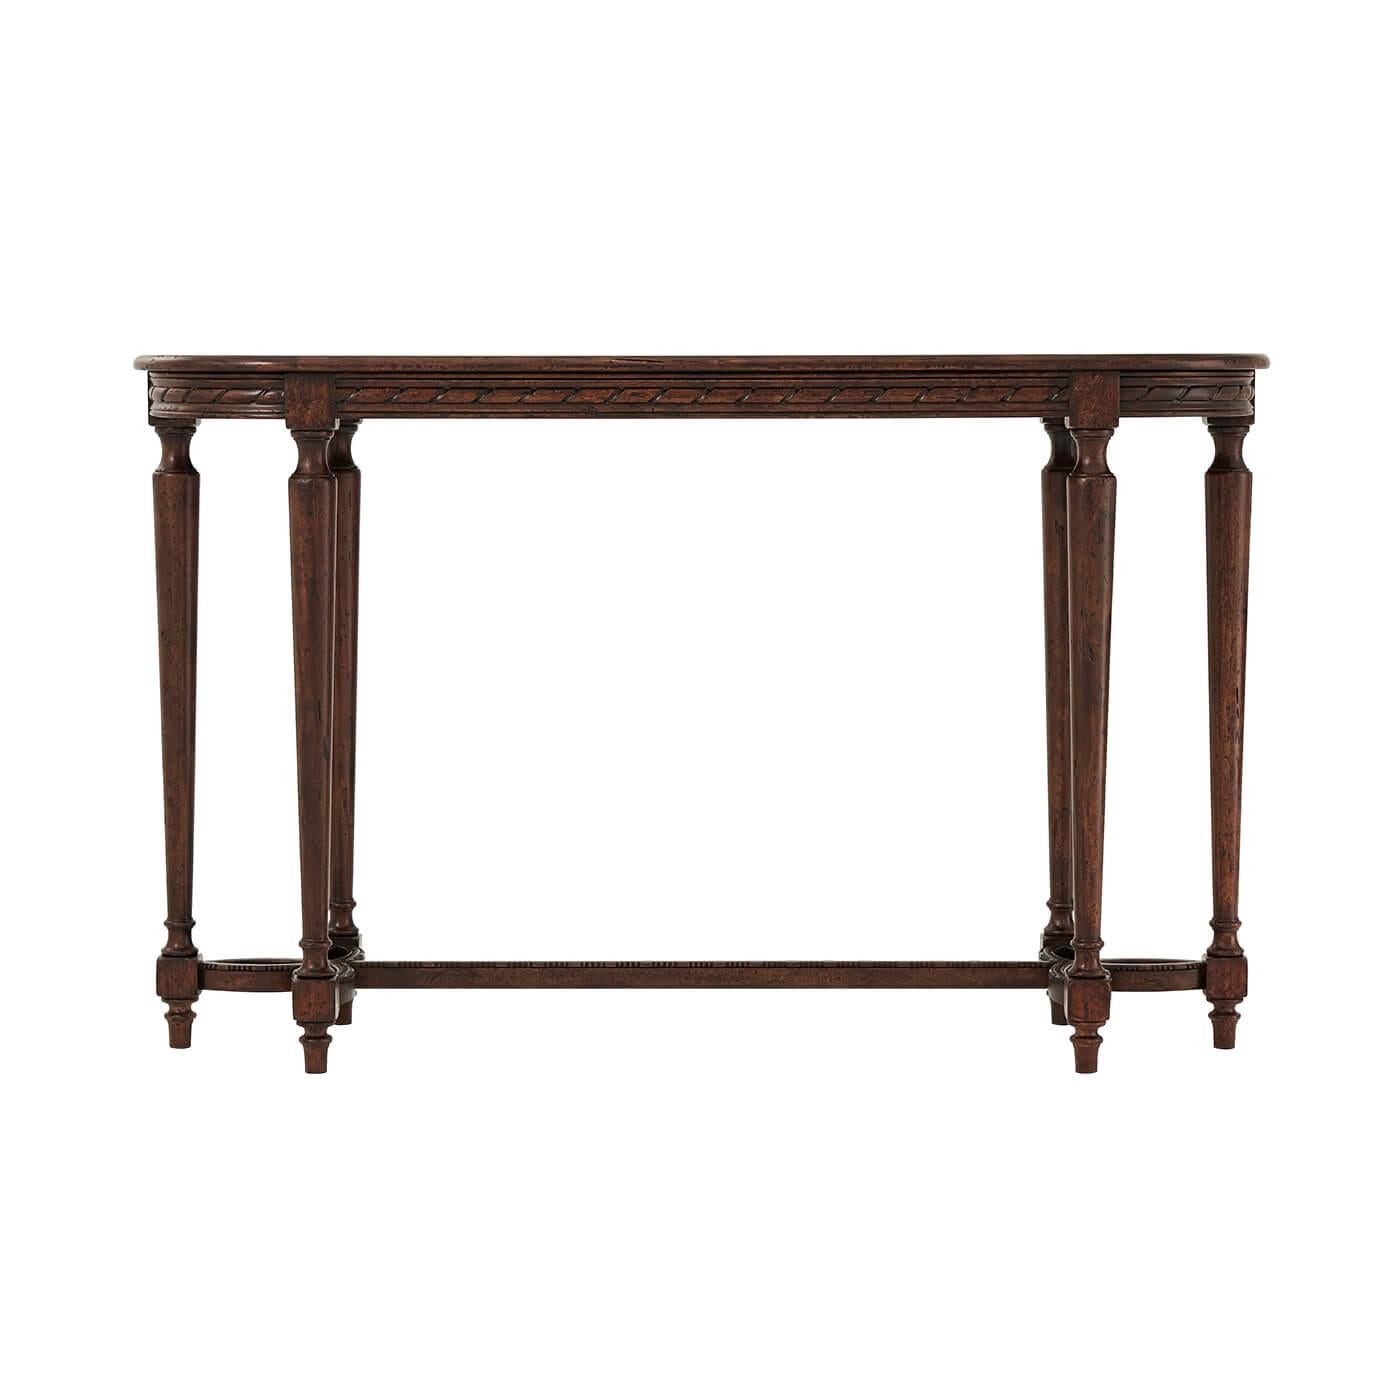 French Louis XVI style provincial carved console table with rustic oak veneers, the oval molded edge top with a carved ribbon apron with six turned and tapered legs joined by a trefoil carved and pieces stretcher base.

Dimensions: 54